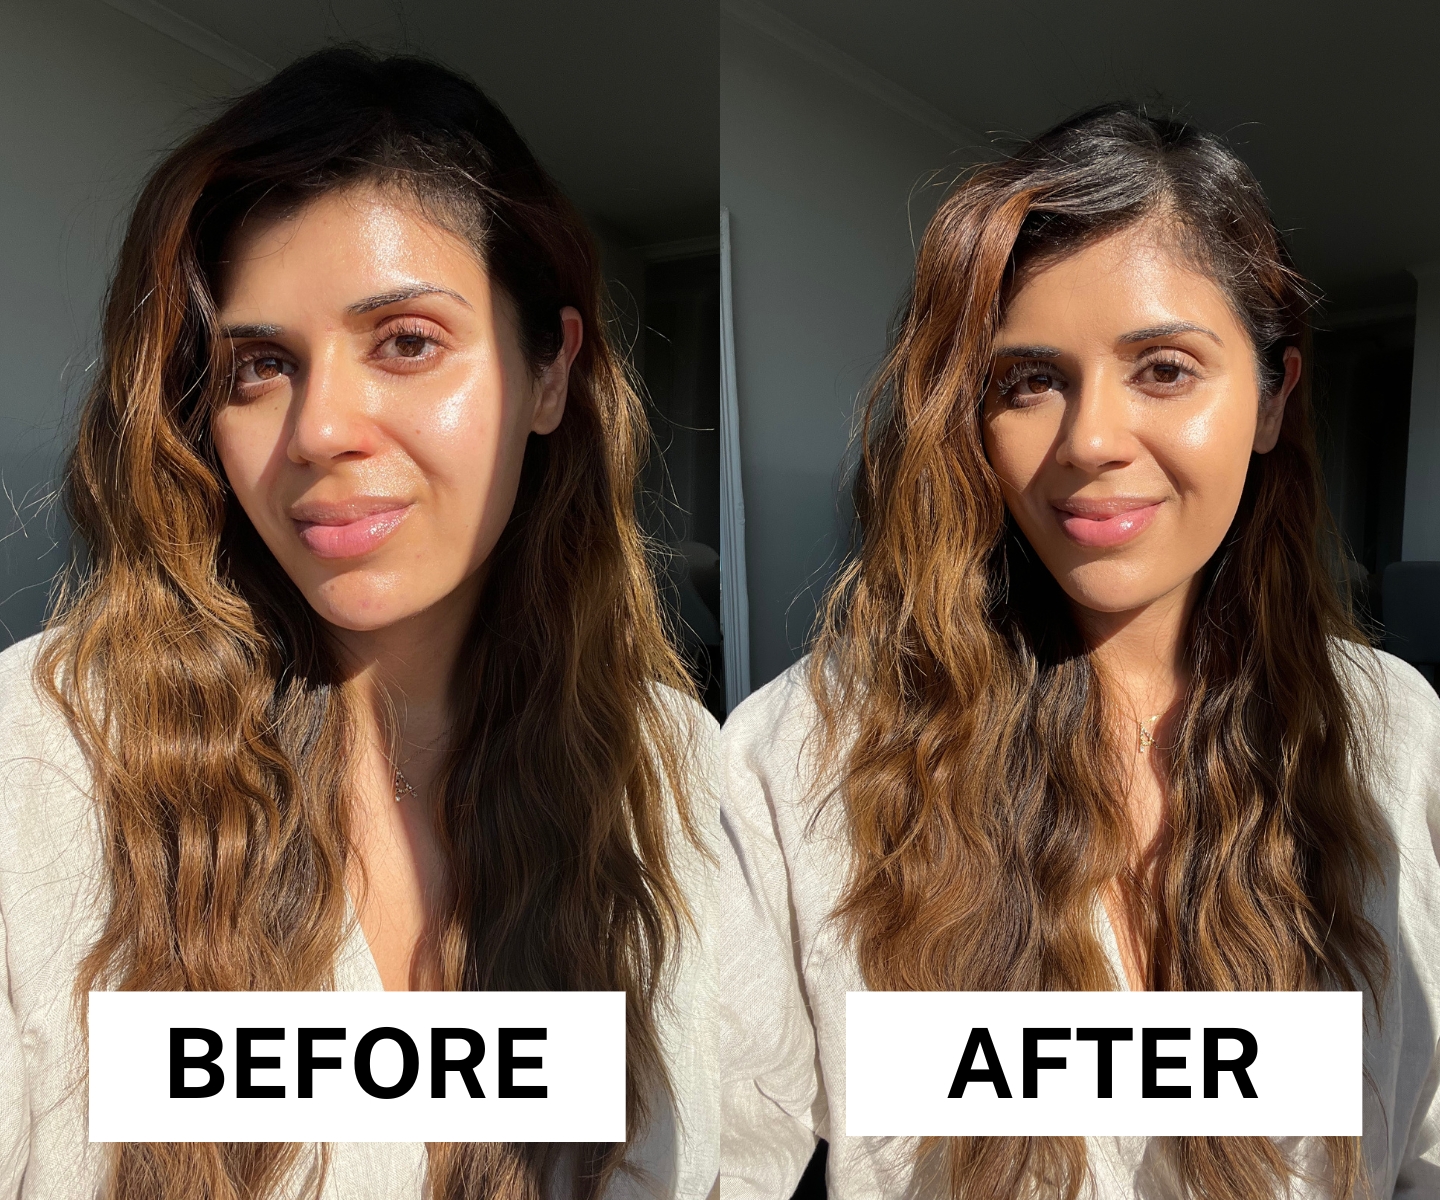 Can YSL's New Foundation Really Last for 24 Hours? I Put It to the Ultimate  Test